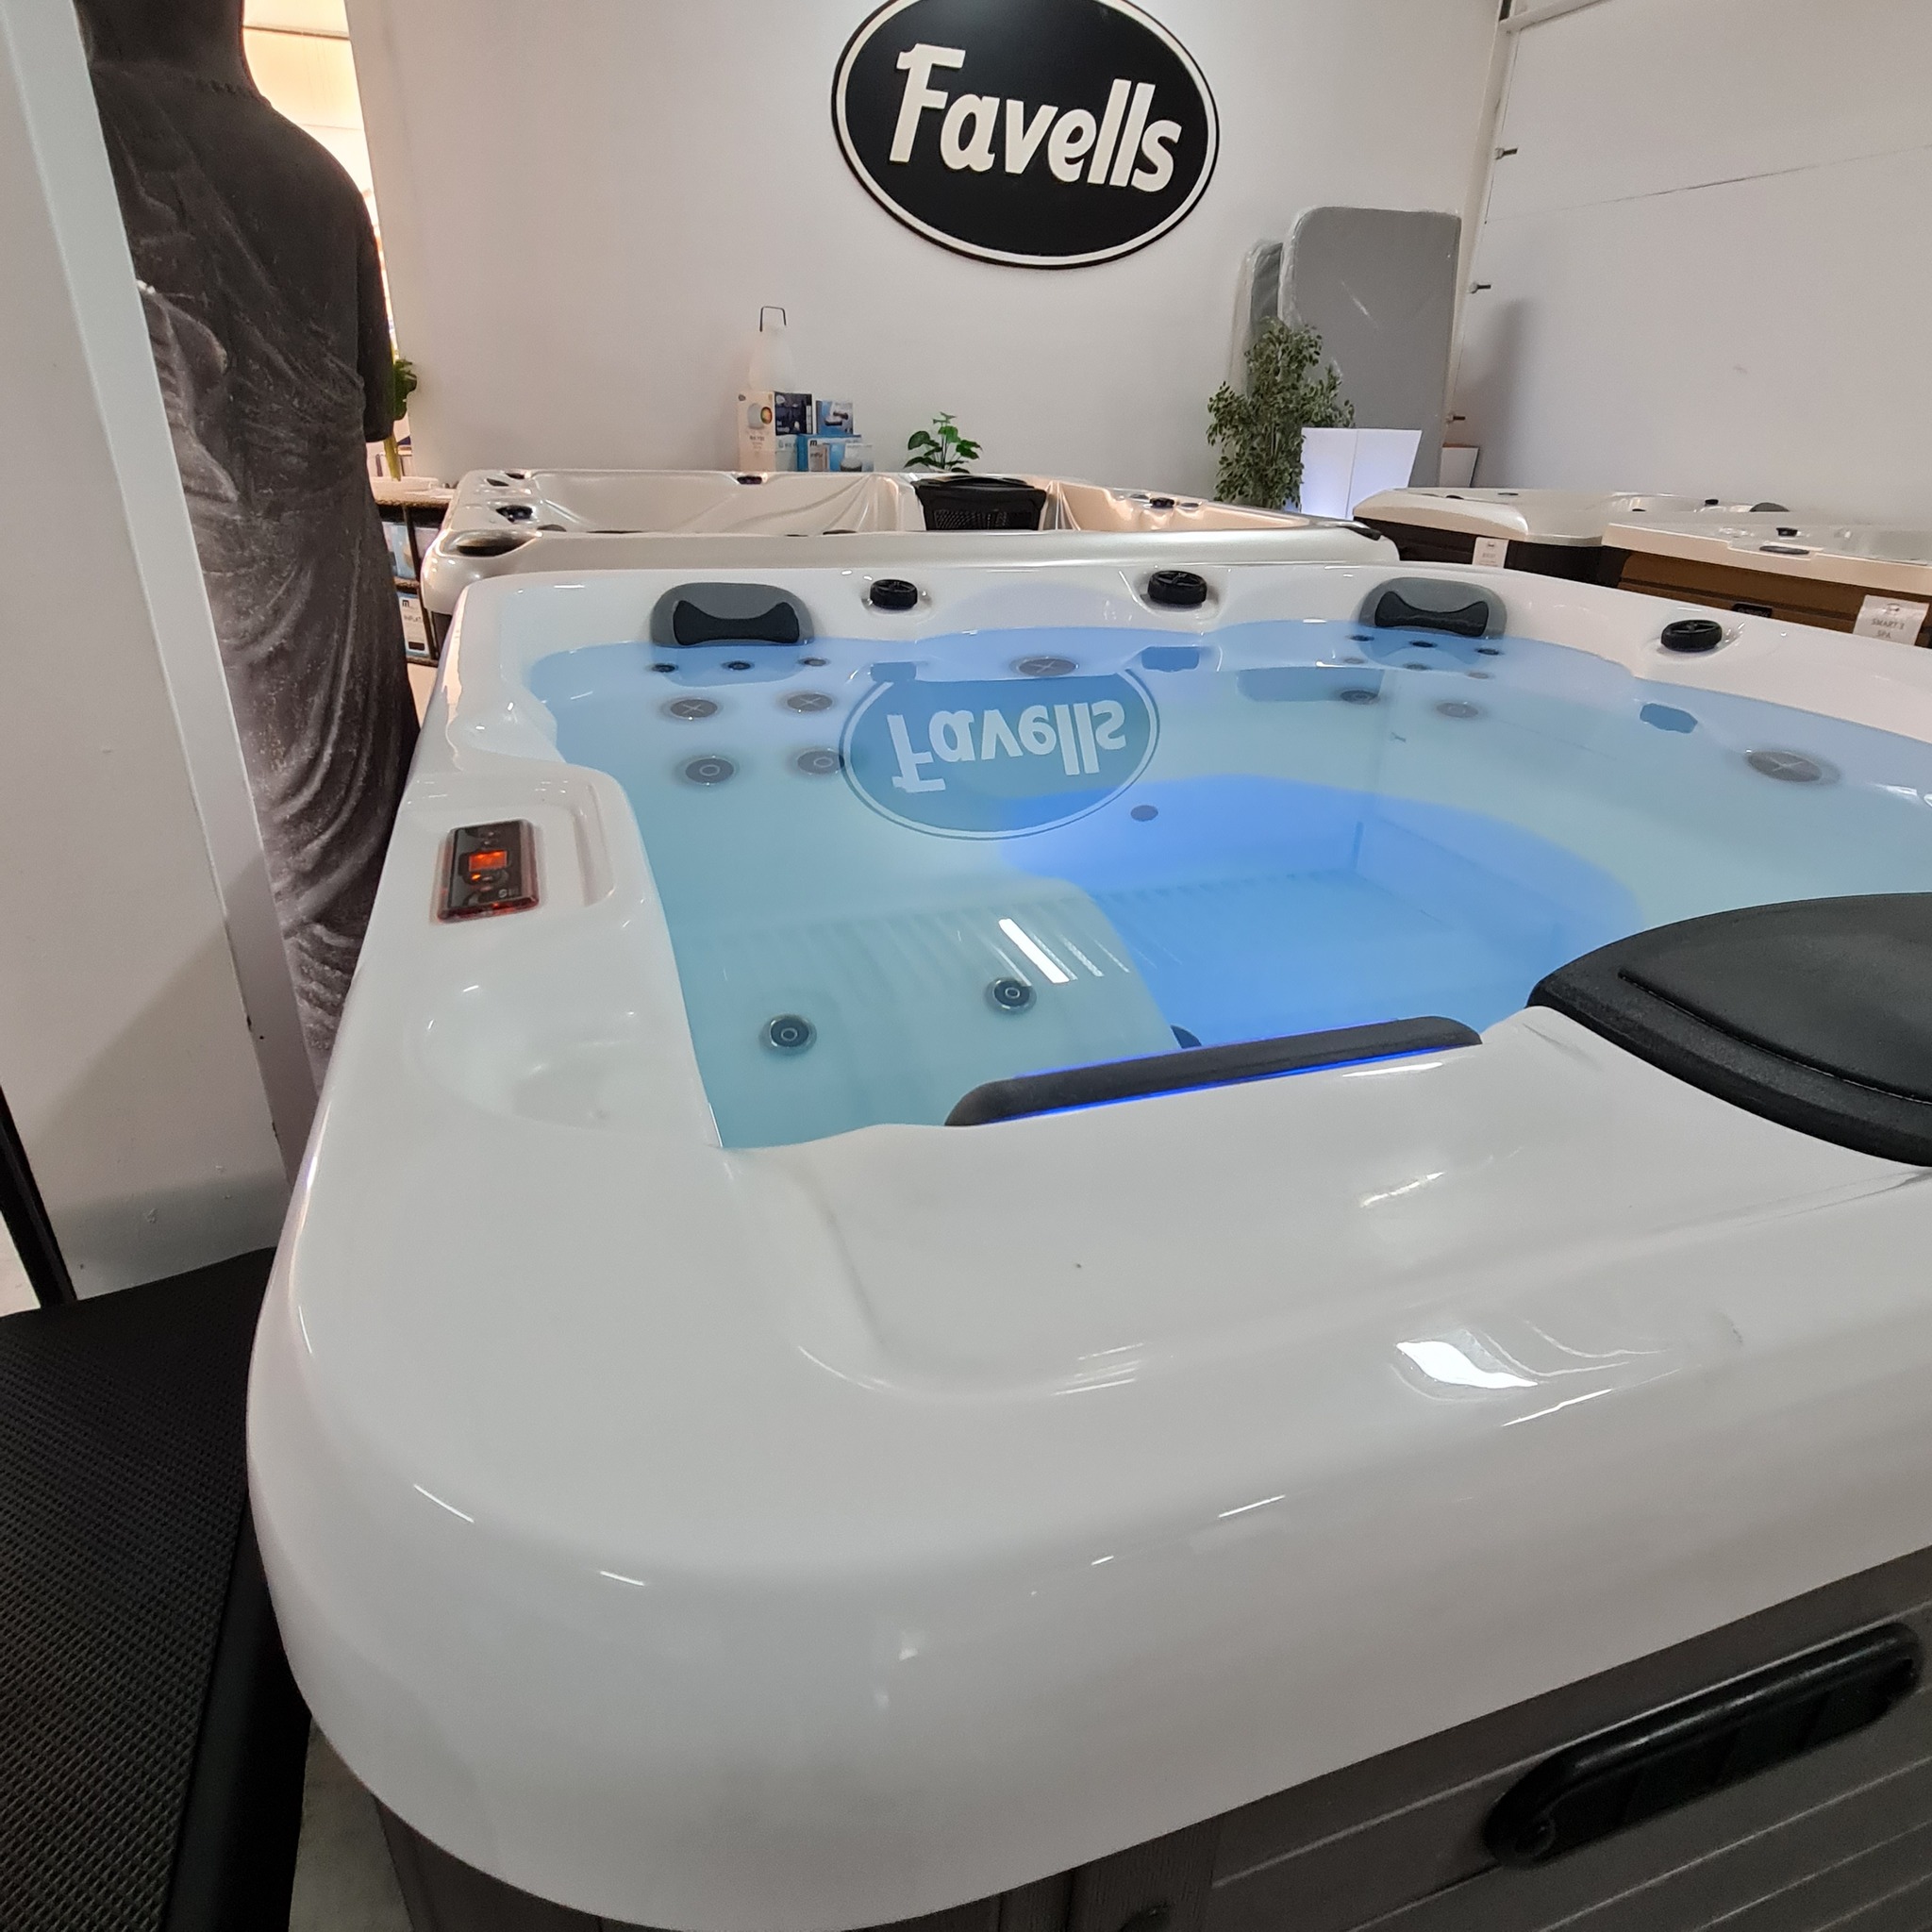 Interested in a spa?  Visit our showroom where we have a large variety of spas on display.

 » Outdoor Furniture Fuengirola, Costa Del Sol, Spain